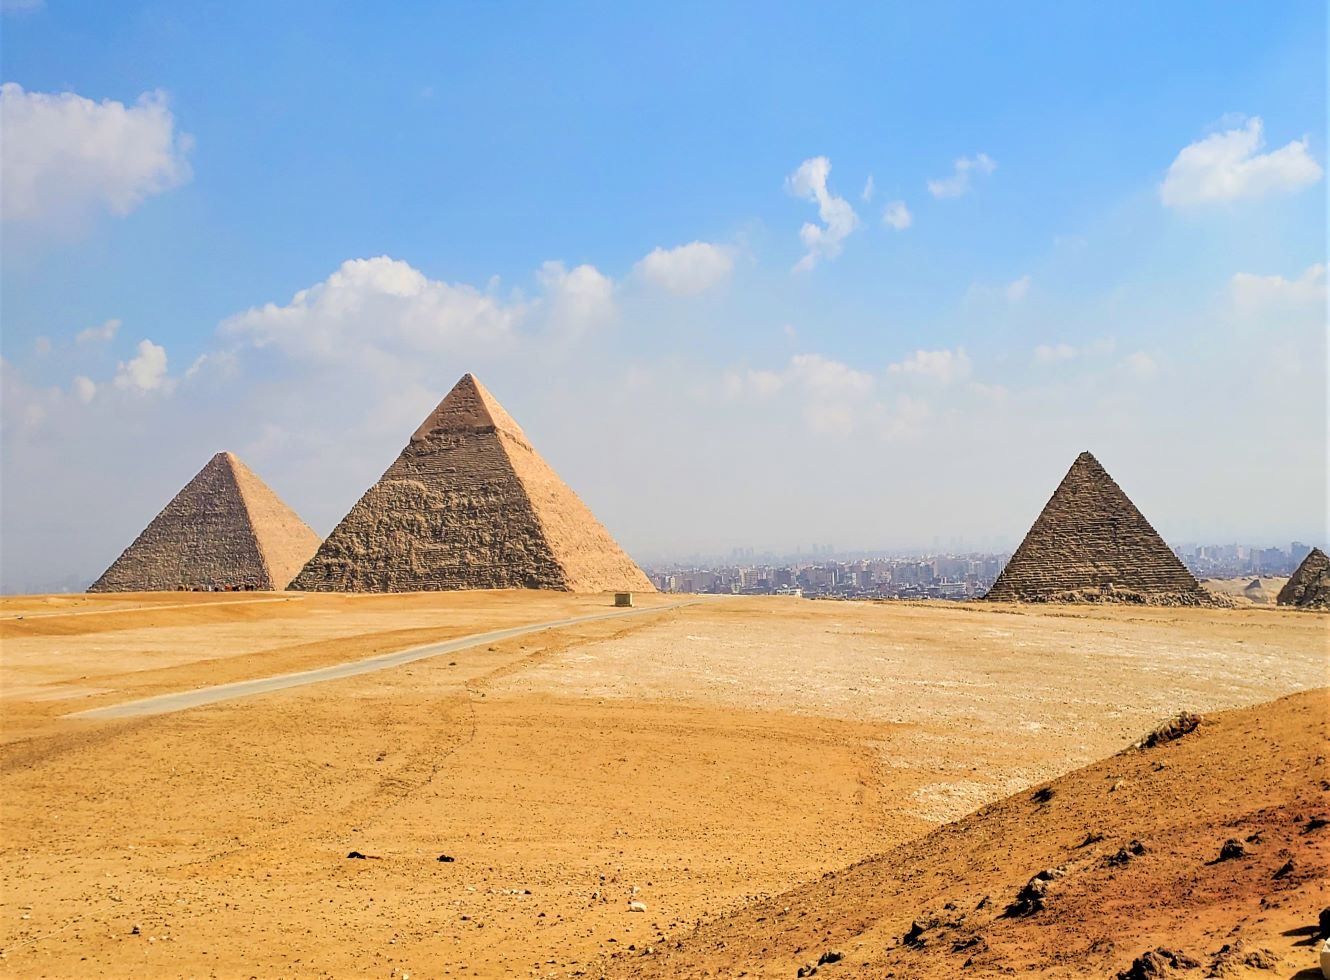 The giza plateau with the three large pyramids in the distance